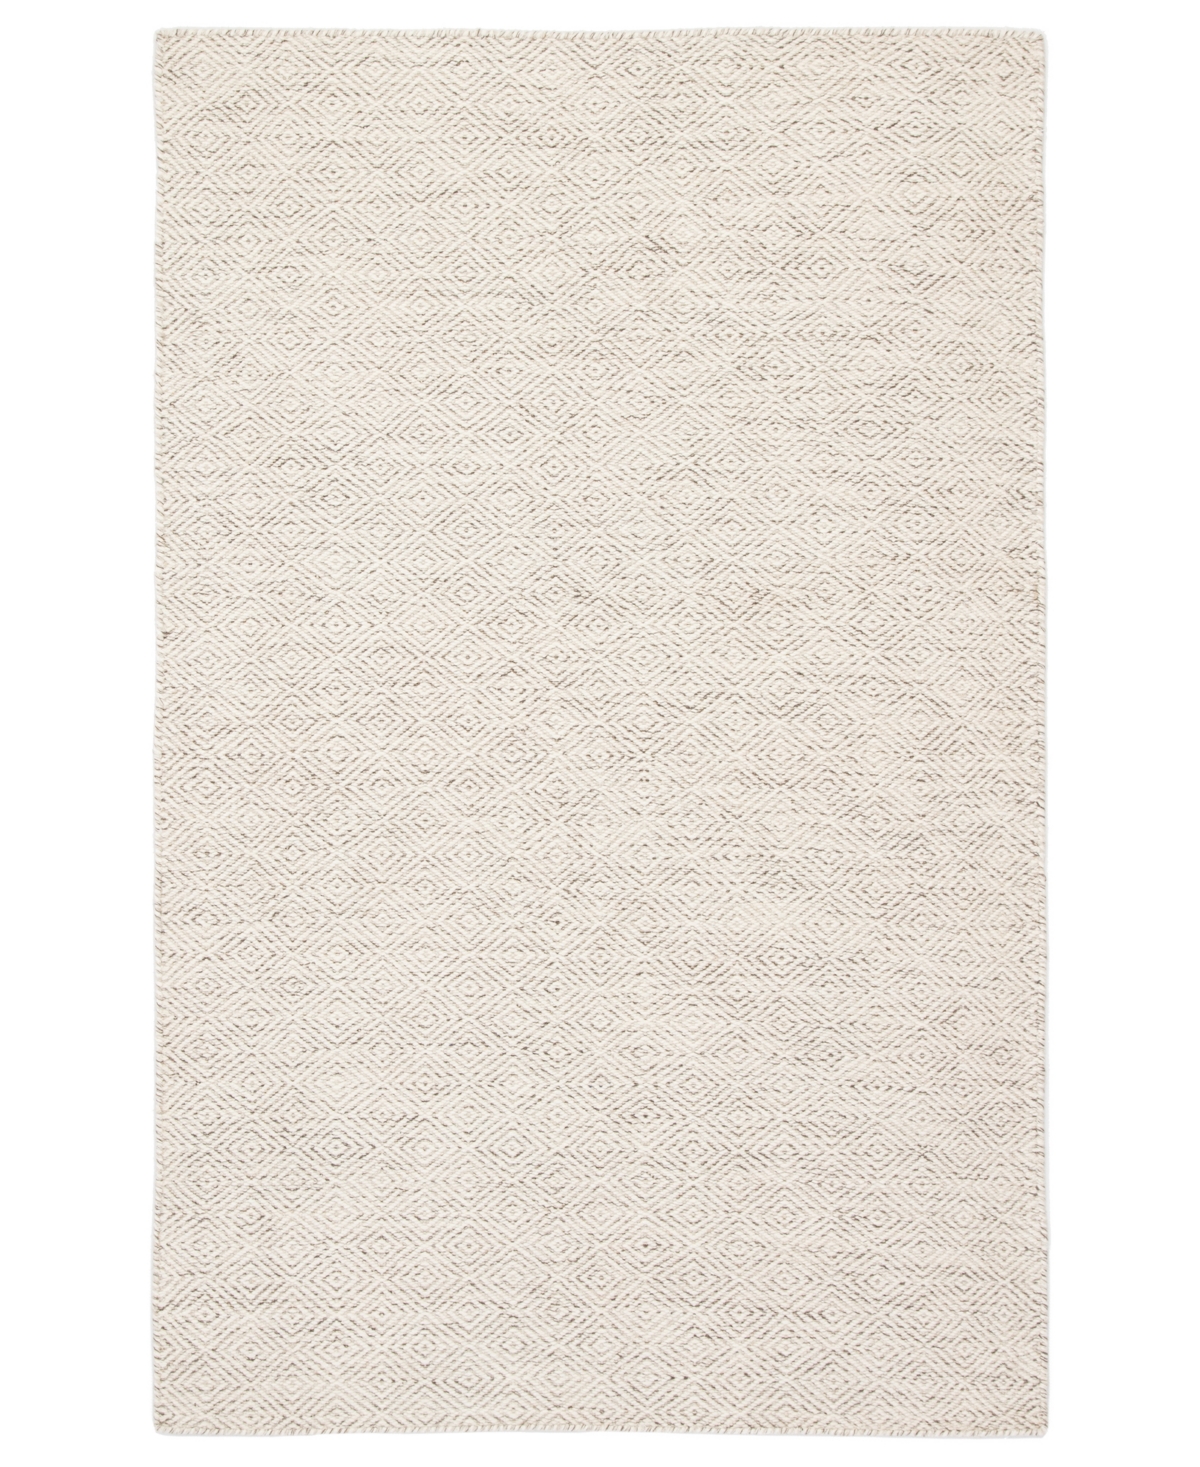 Jaipur Living Enclave ENC03 7'10in x 9'10in Area Rug - White